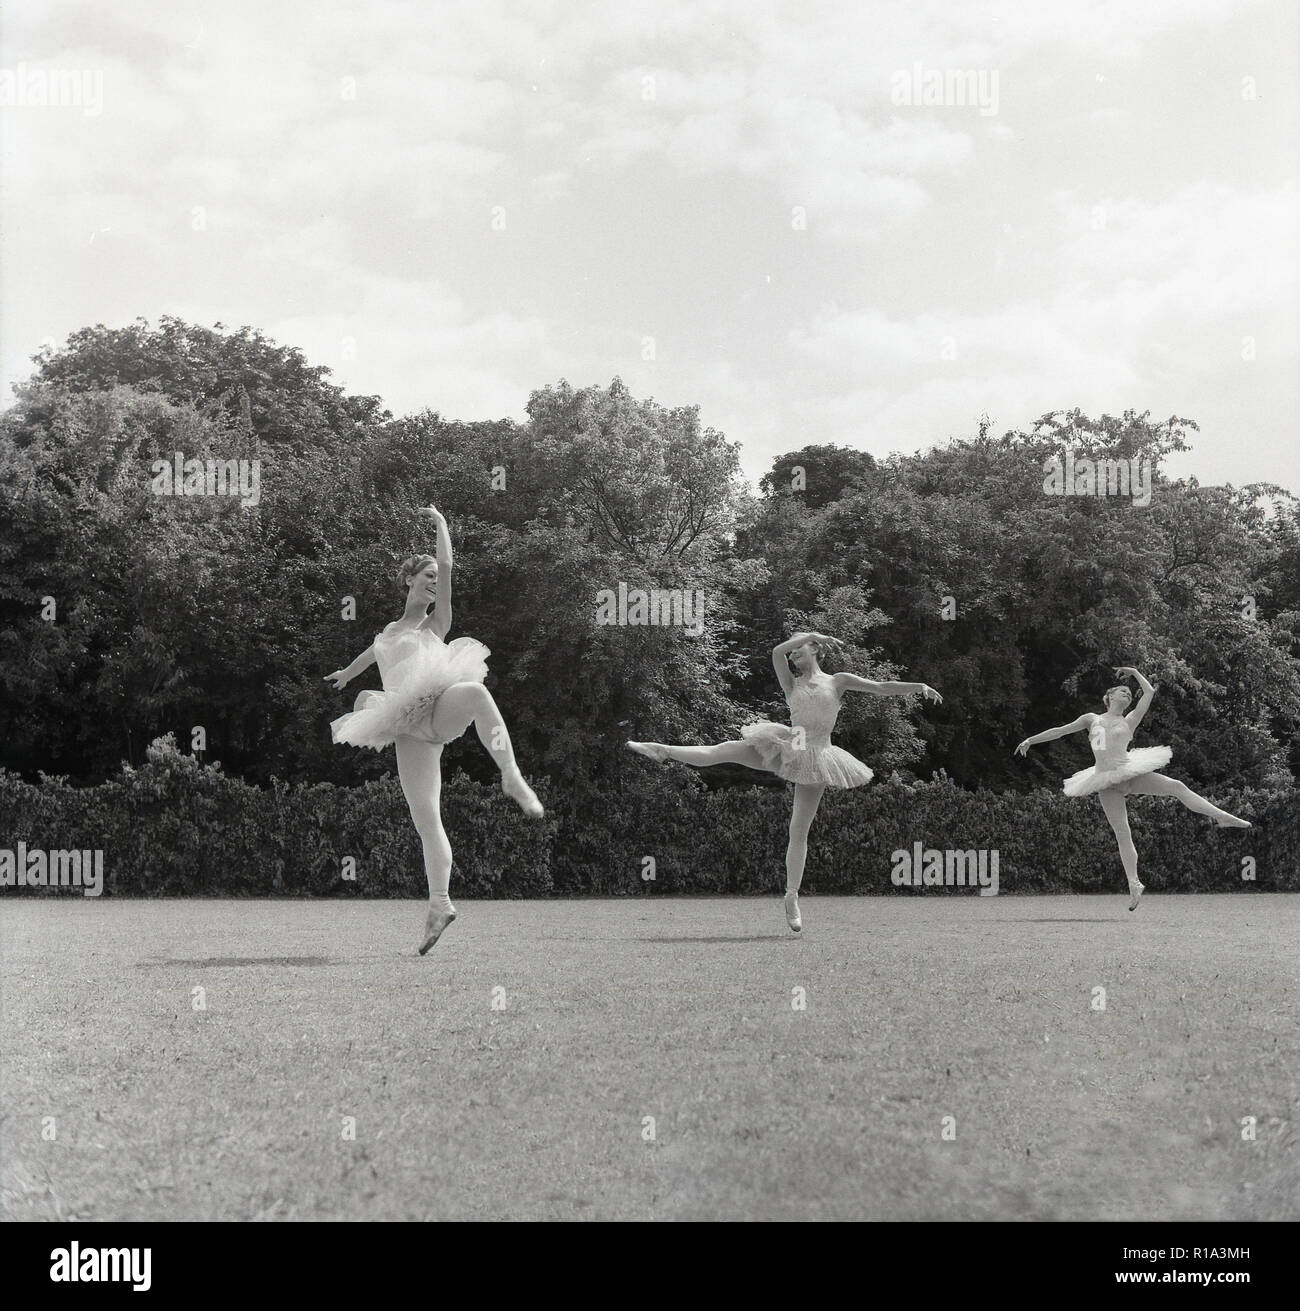 1967, Tring Arts Festival, female ballet dancers performing outside at the Arts Educational School, an independent co-educational school, specialising in dance, the sister school of the London one. It was founded in 1939 and in 1945 moved to Tring Park Mansion owned by the Rothschild family and was originally known as the Cone-Ripman school. In 2009 the school was renamed as the Tring Park School for the Performing Arts, and became independent of the London one. Stock Photo